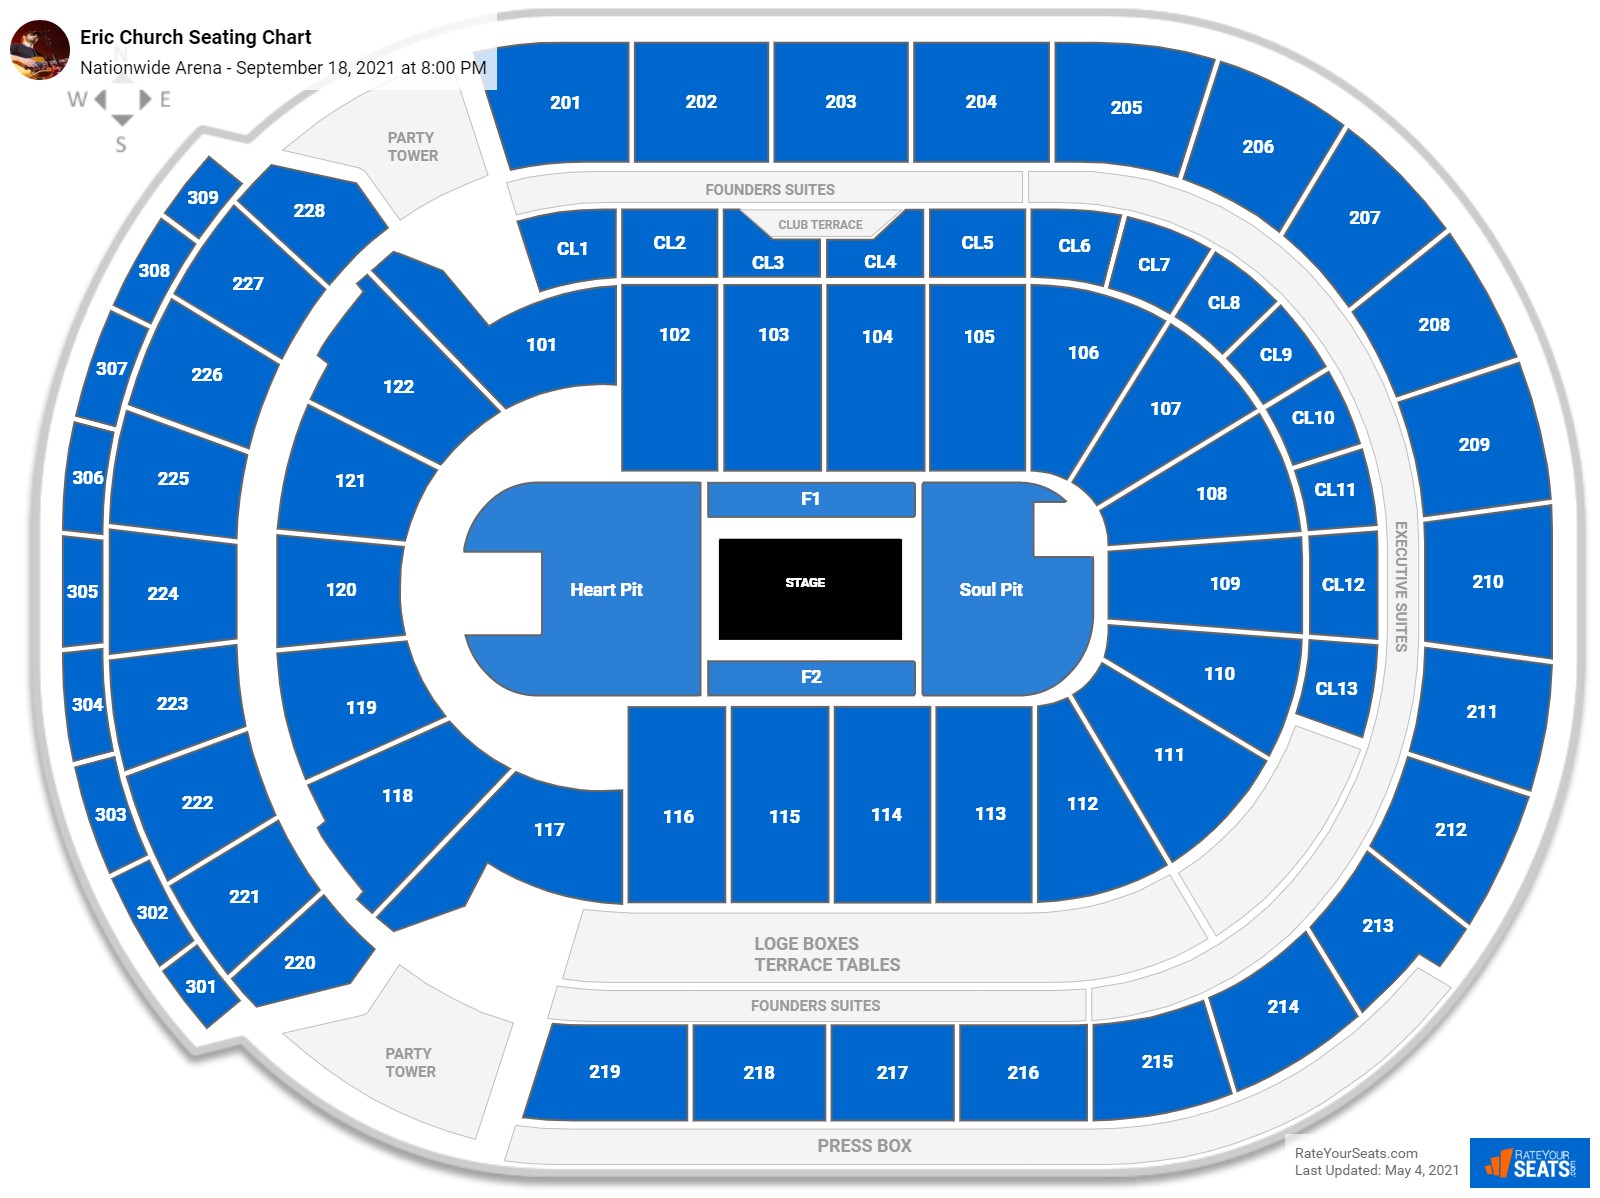 Nationwide Arena Seating Charts for Concerts